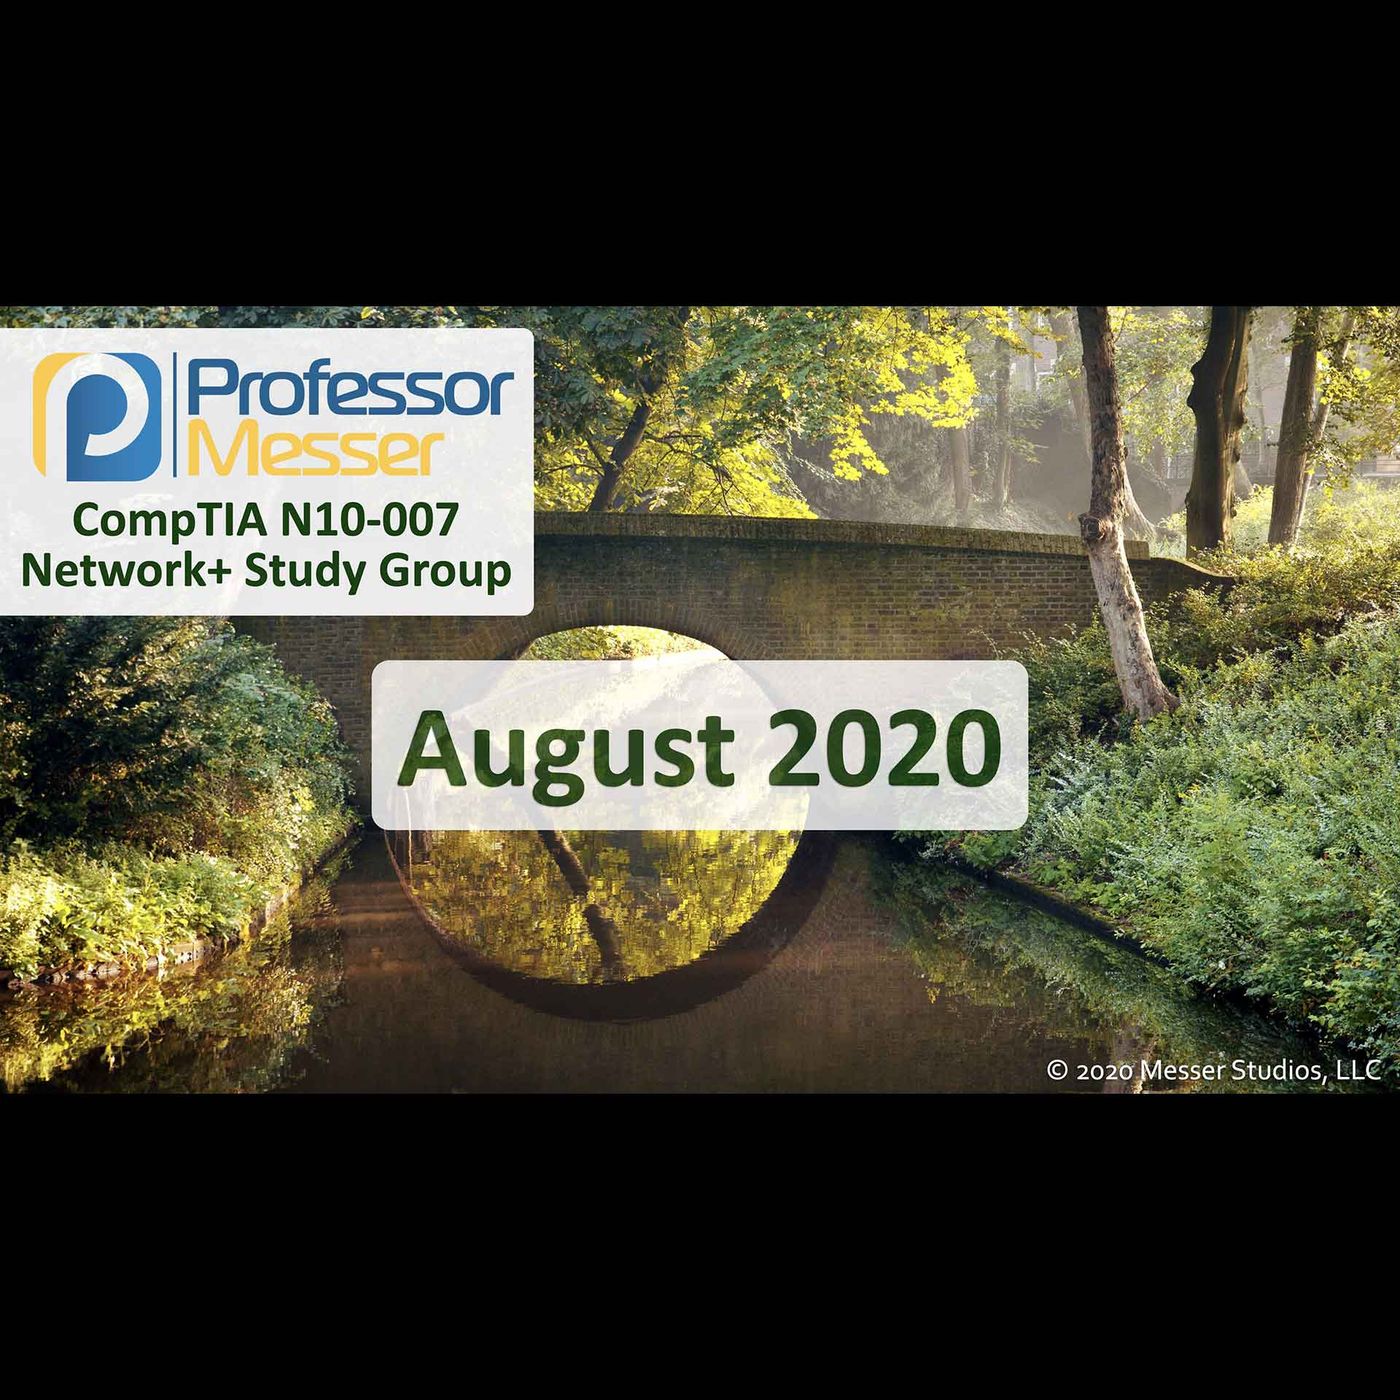 Professor Messer's Network+ Study Group After Show - August 2020